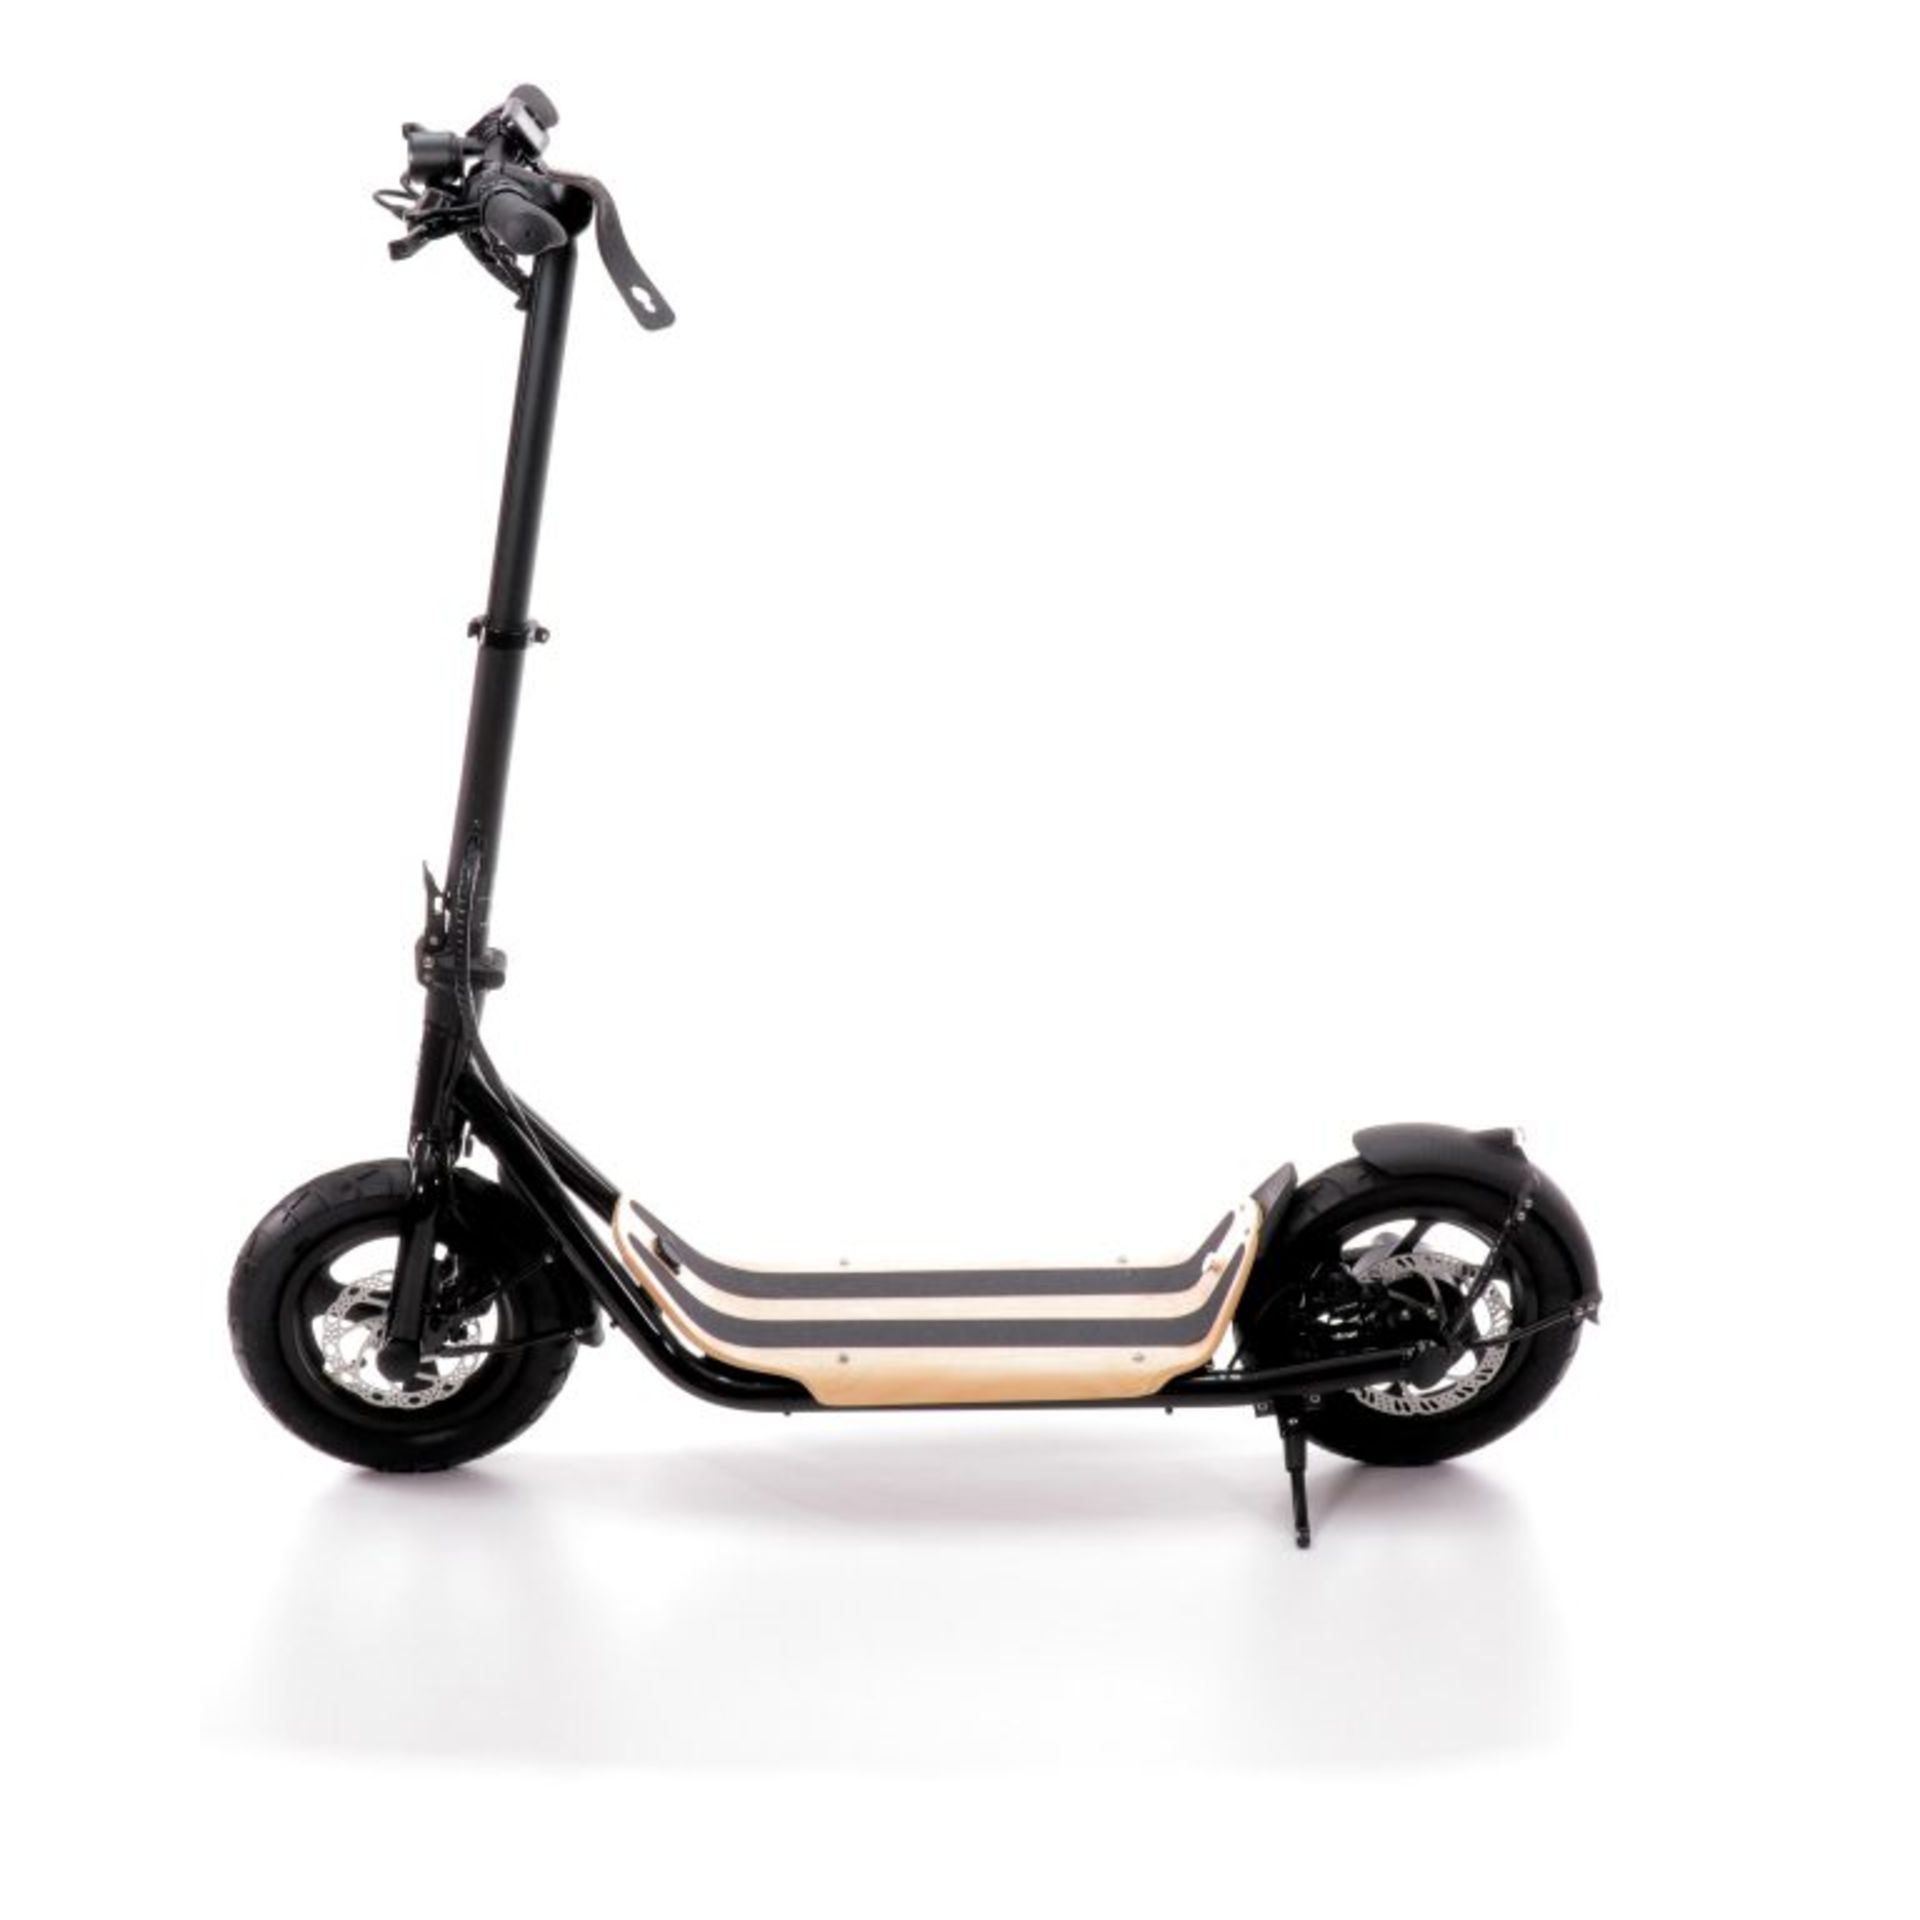 BRAND NEW 8TEV B12 PROXI ELECTRIC SCOOTER MATT BLACK RRP £1299, Perfect city commuter vehicle with - Image 2 of 2